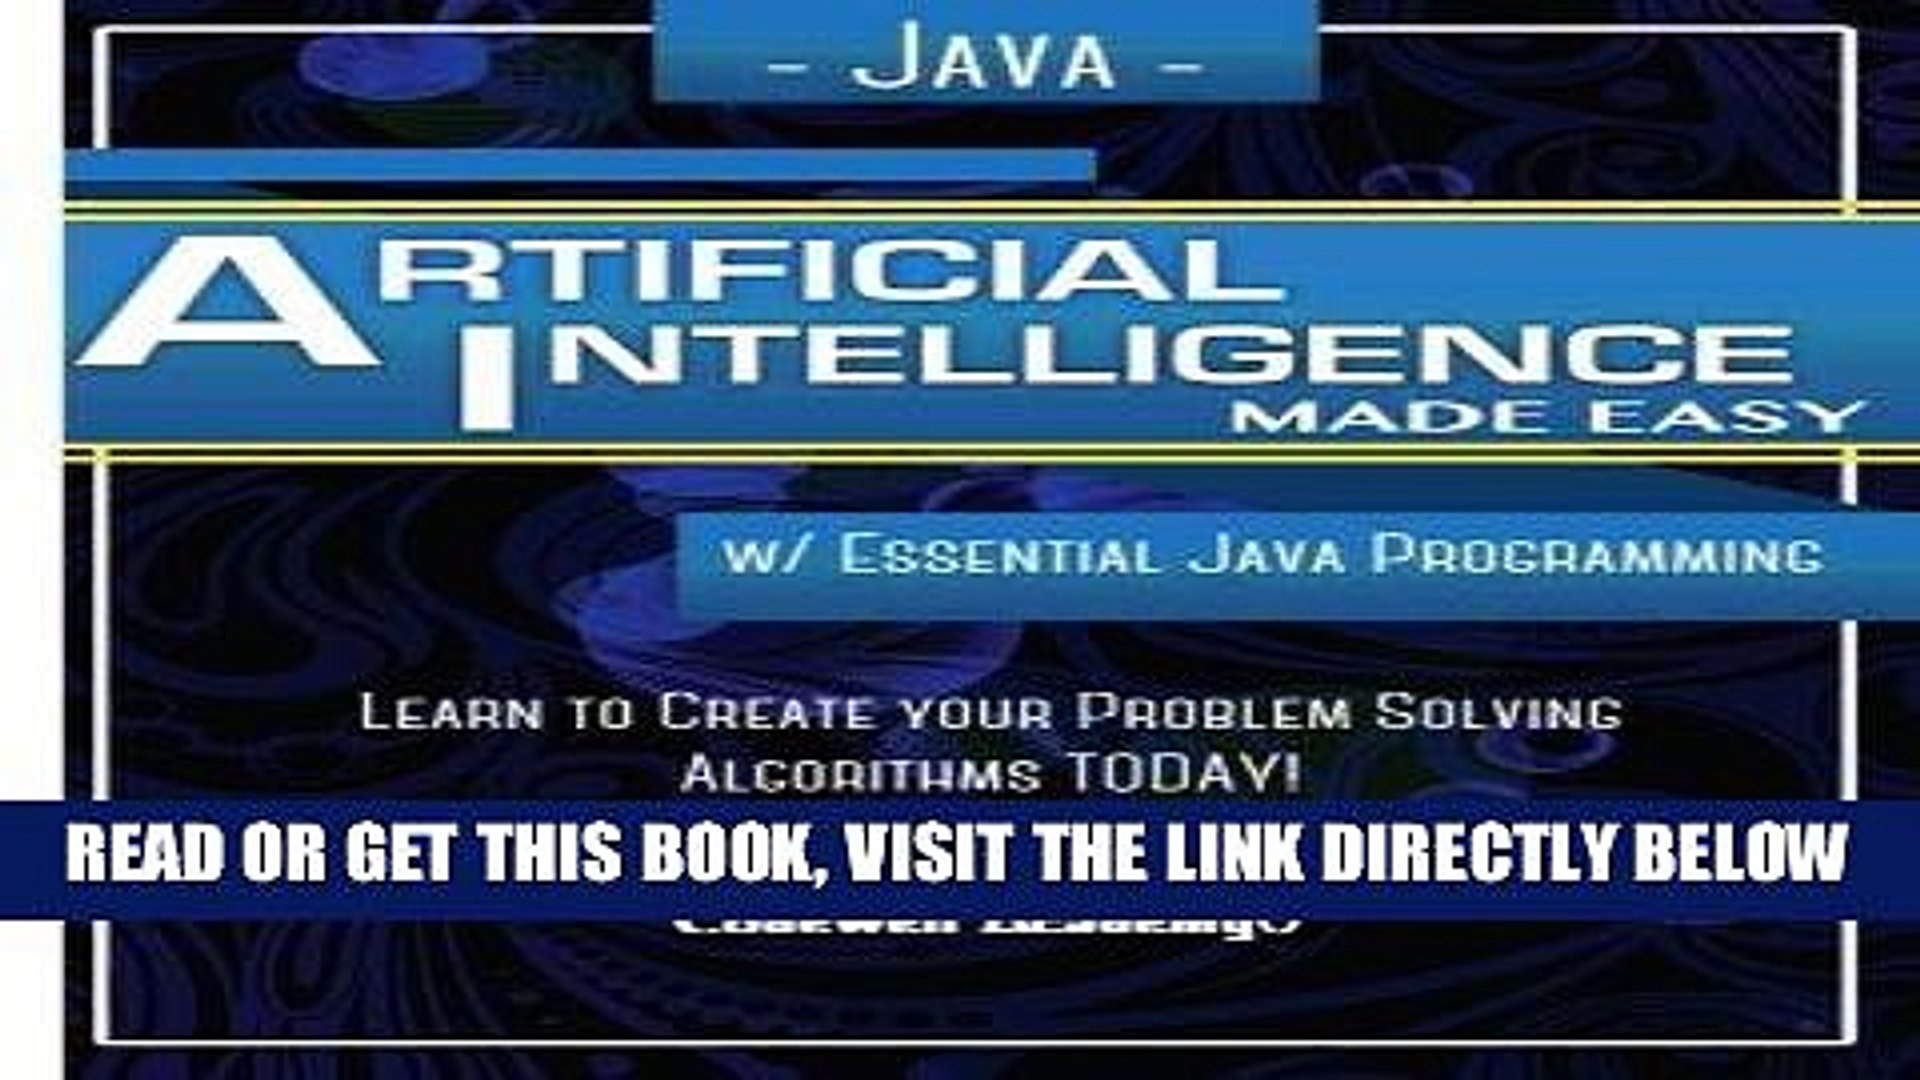 [EBOOK] DOWNLOAD Java Artificial Intelligence: Made Easy, w/ Java Programming; Learn to Create